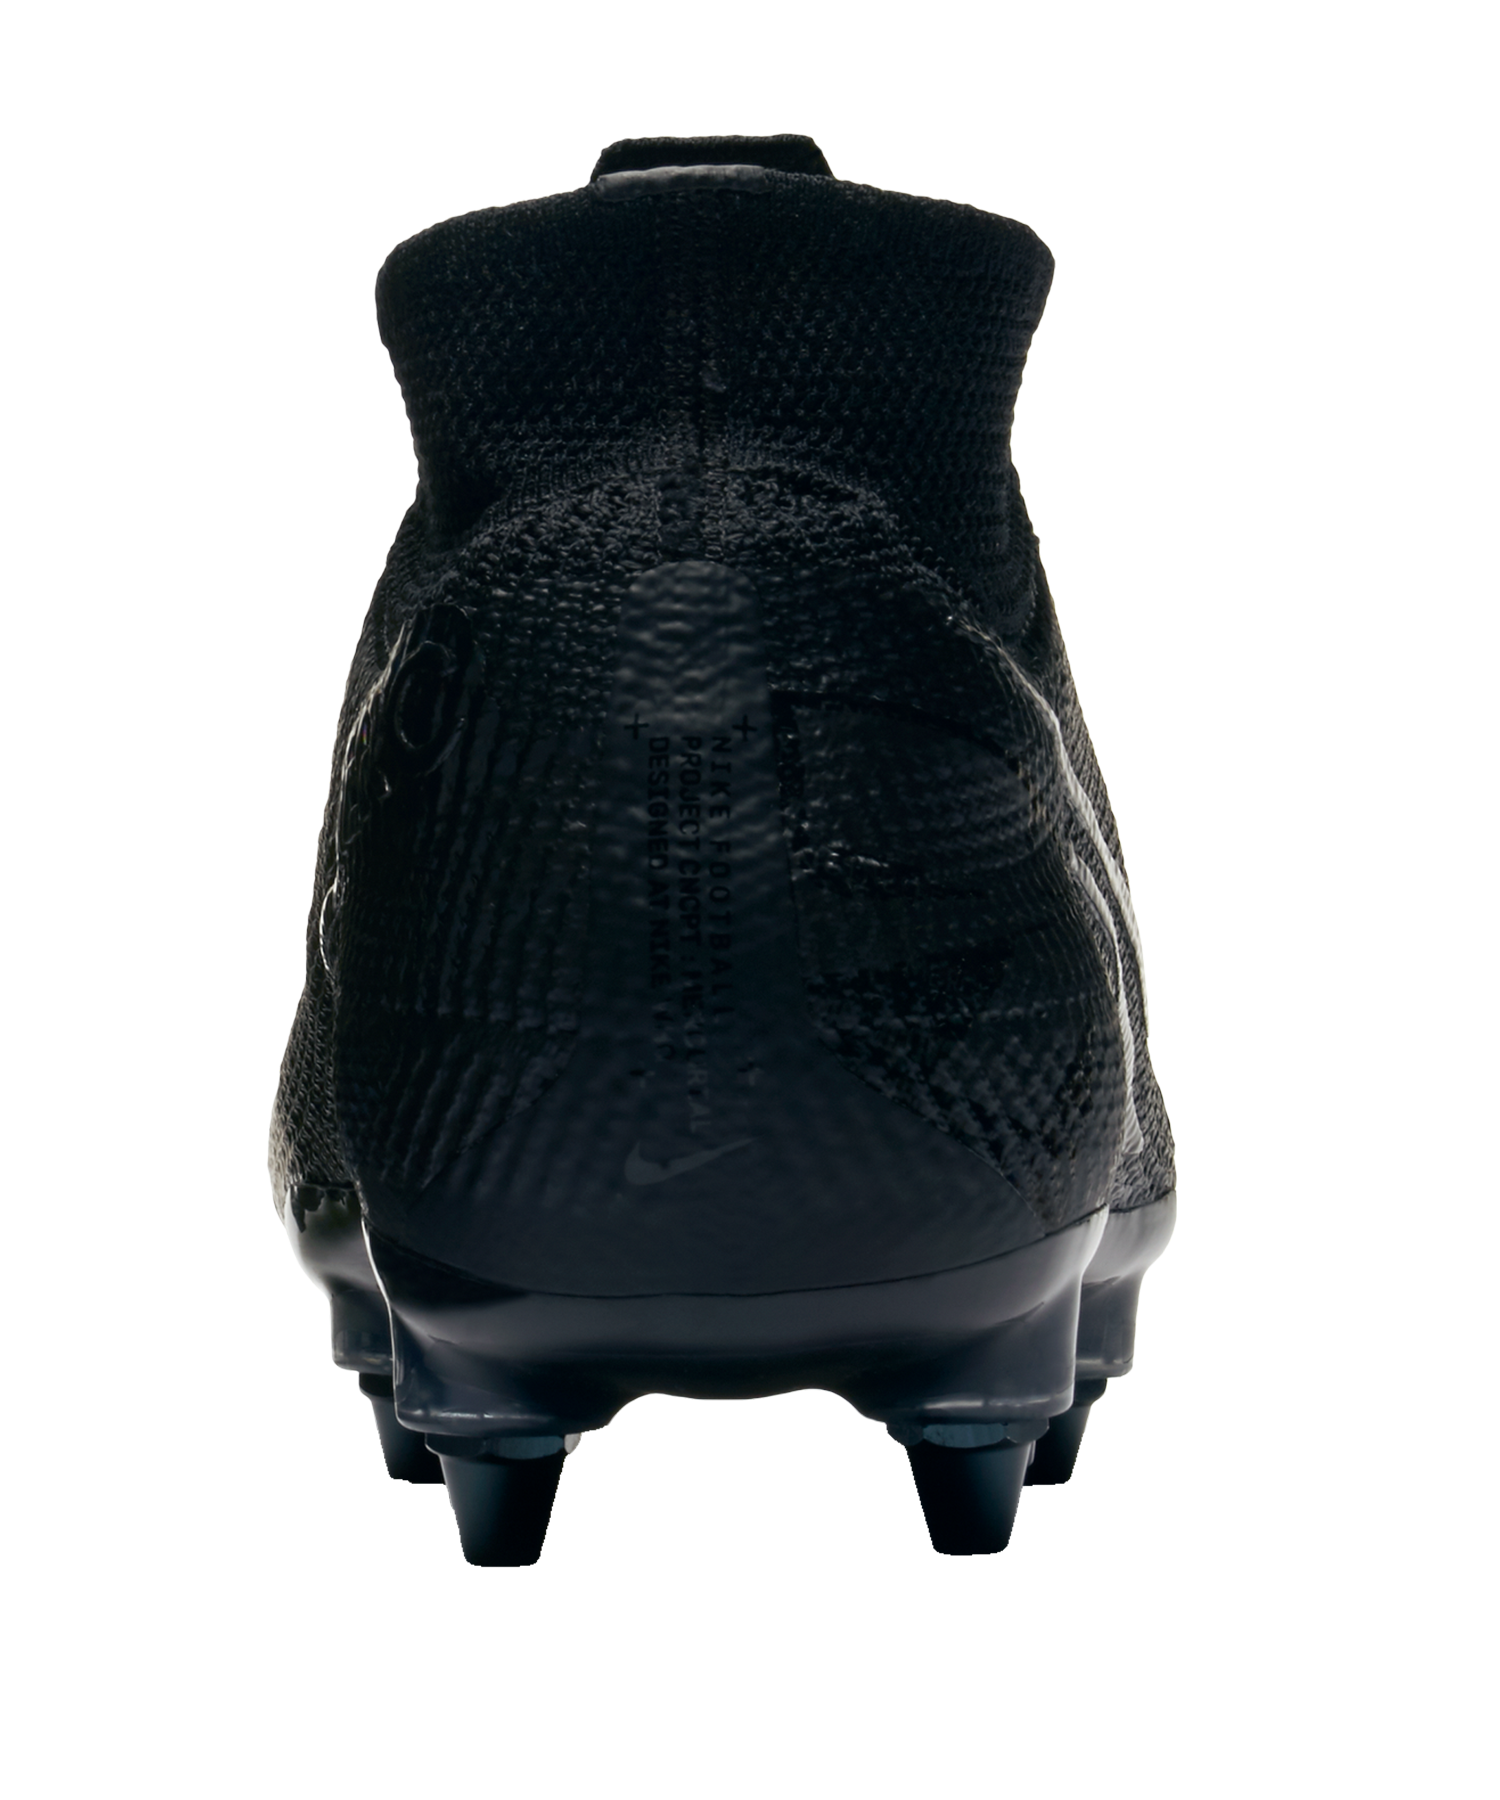 Nike Mercurial Superfly 7 Academy FG MG M AT7946 414.